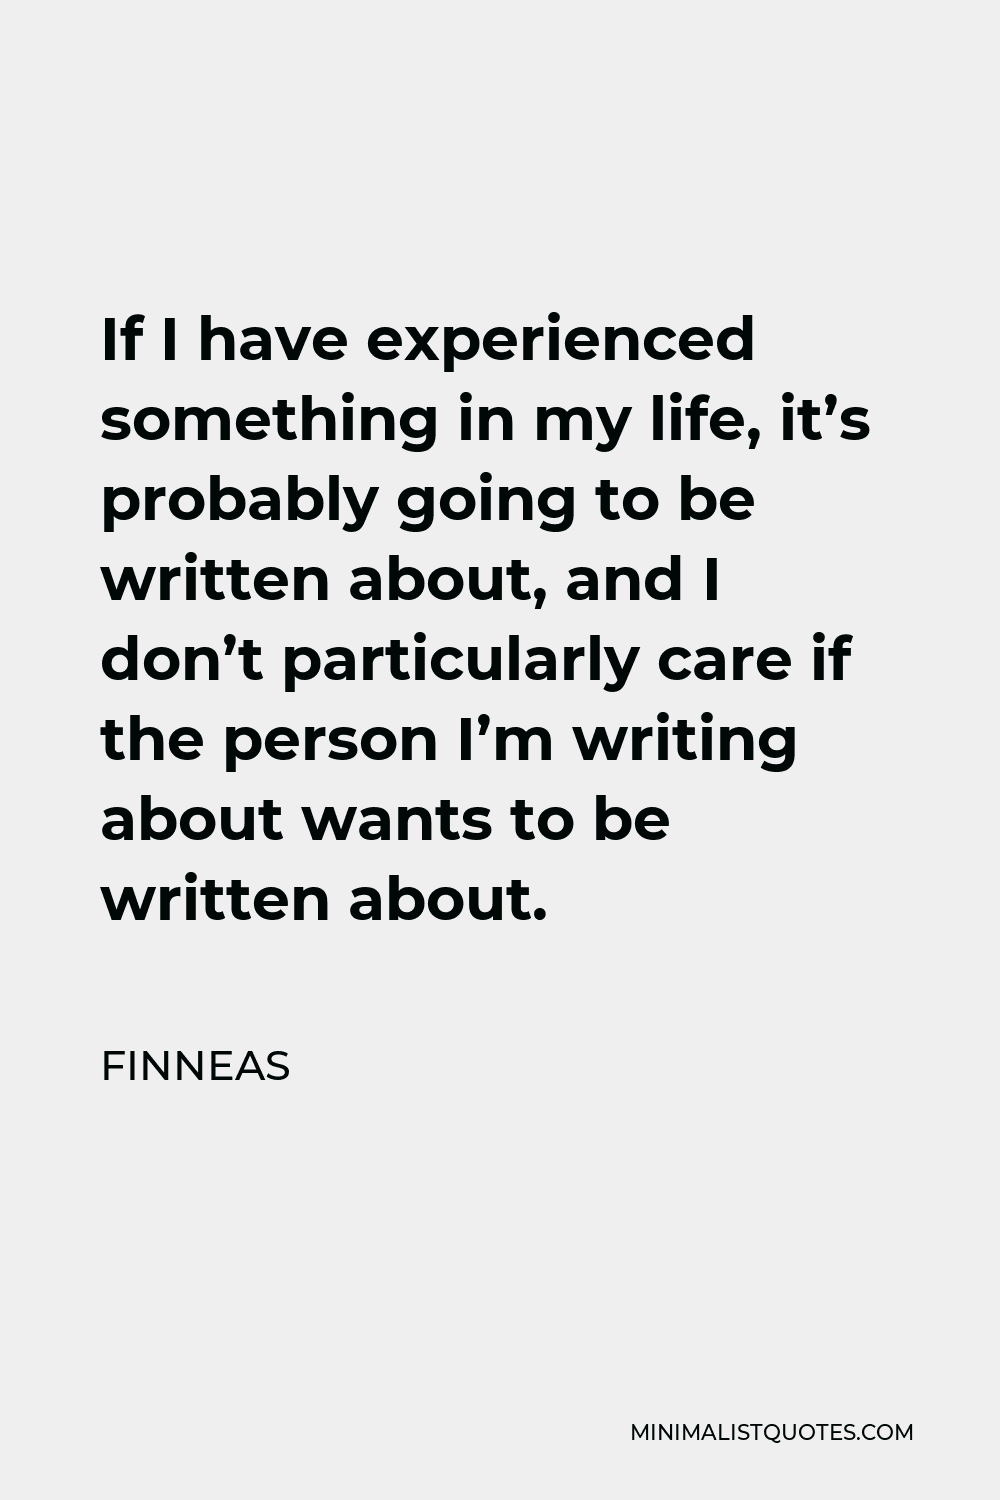 Finneas Quote - If I have experienced something in my life, it’s probably going to be written about, and I don’t particularly care if the person I’m writing about wants to be written about.